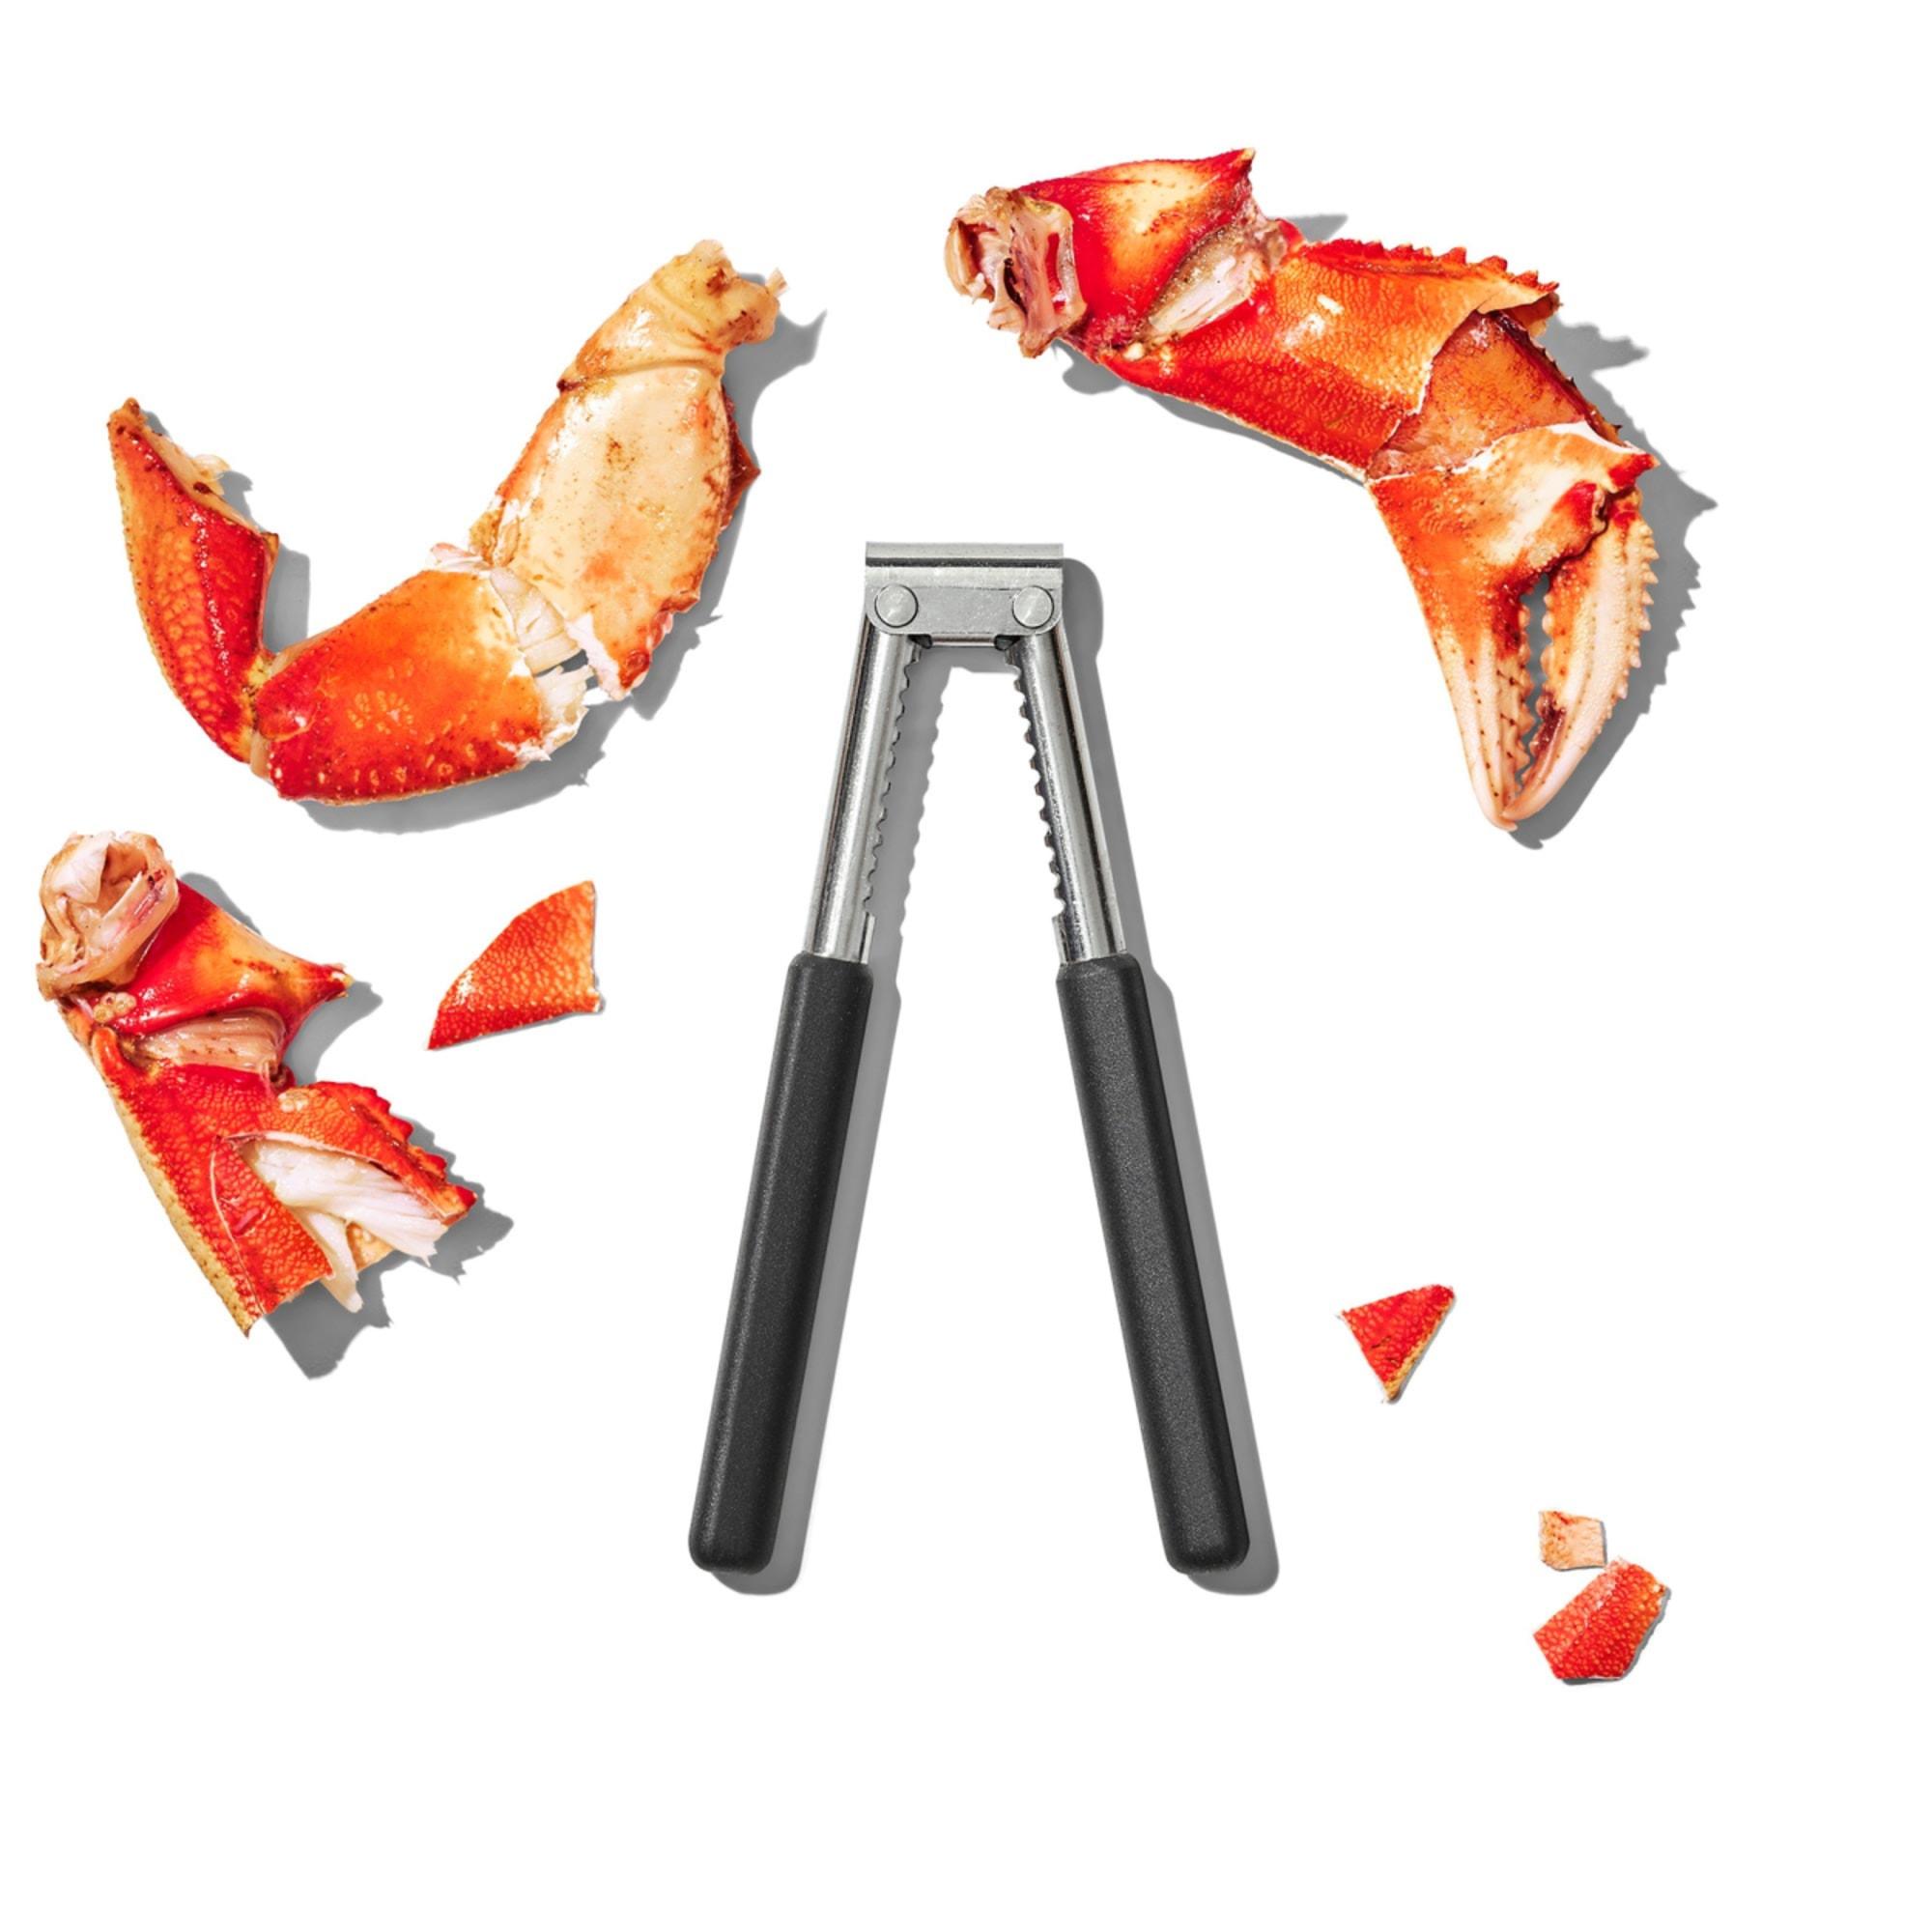 OXO Good Grips Seafood and Nut Cracker Image 7